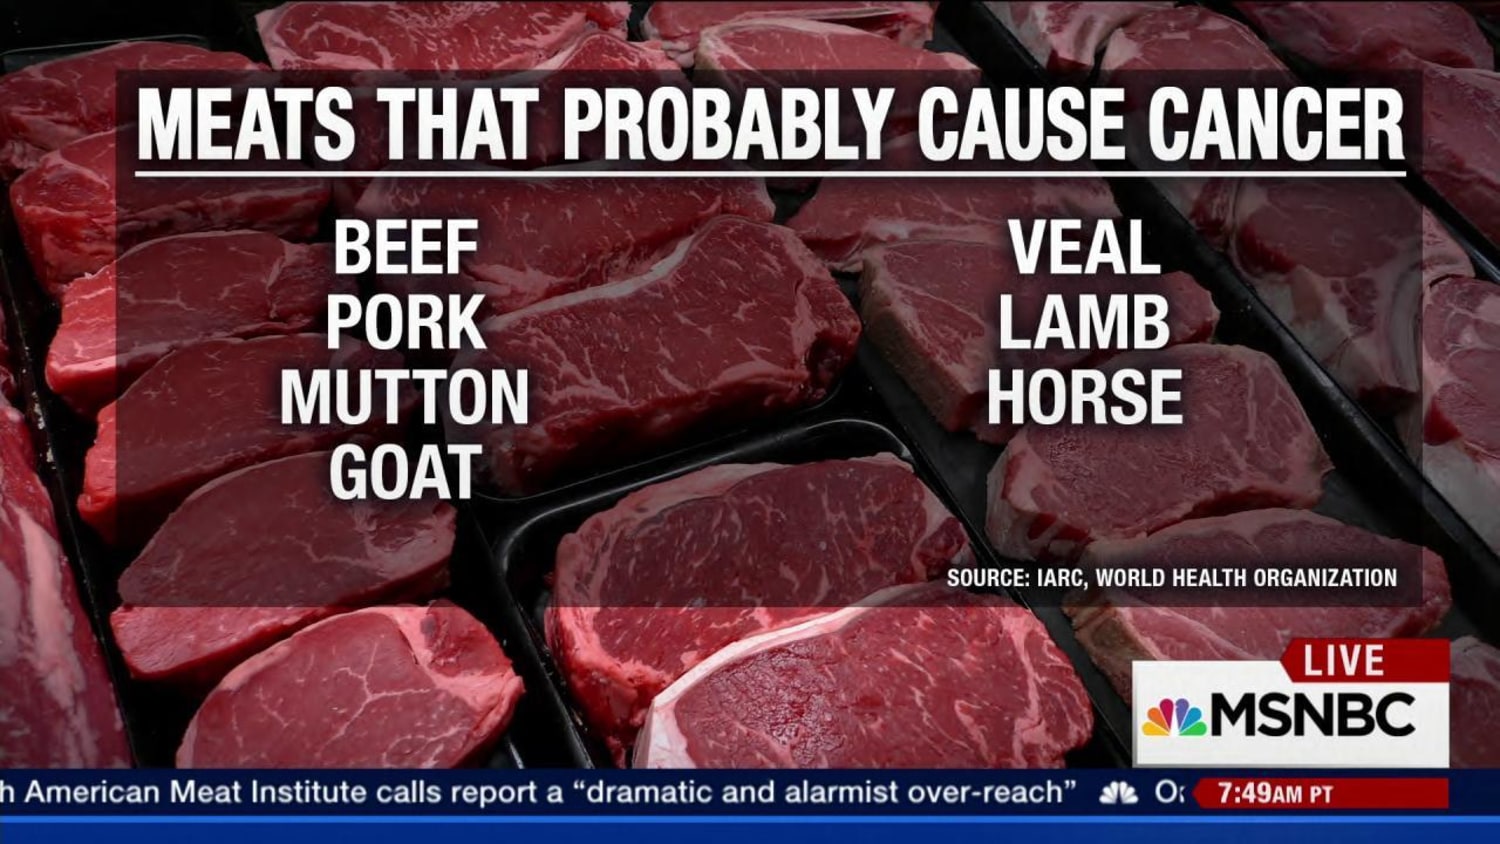 Processed meat causes cancer; red meat probably does, too: WHO